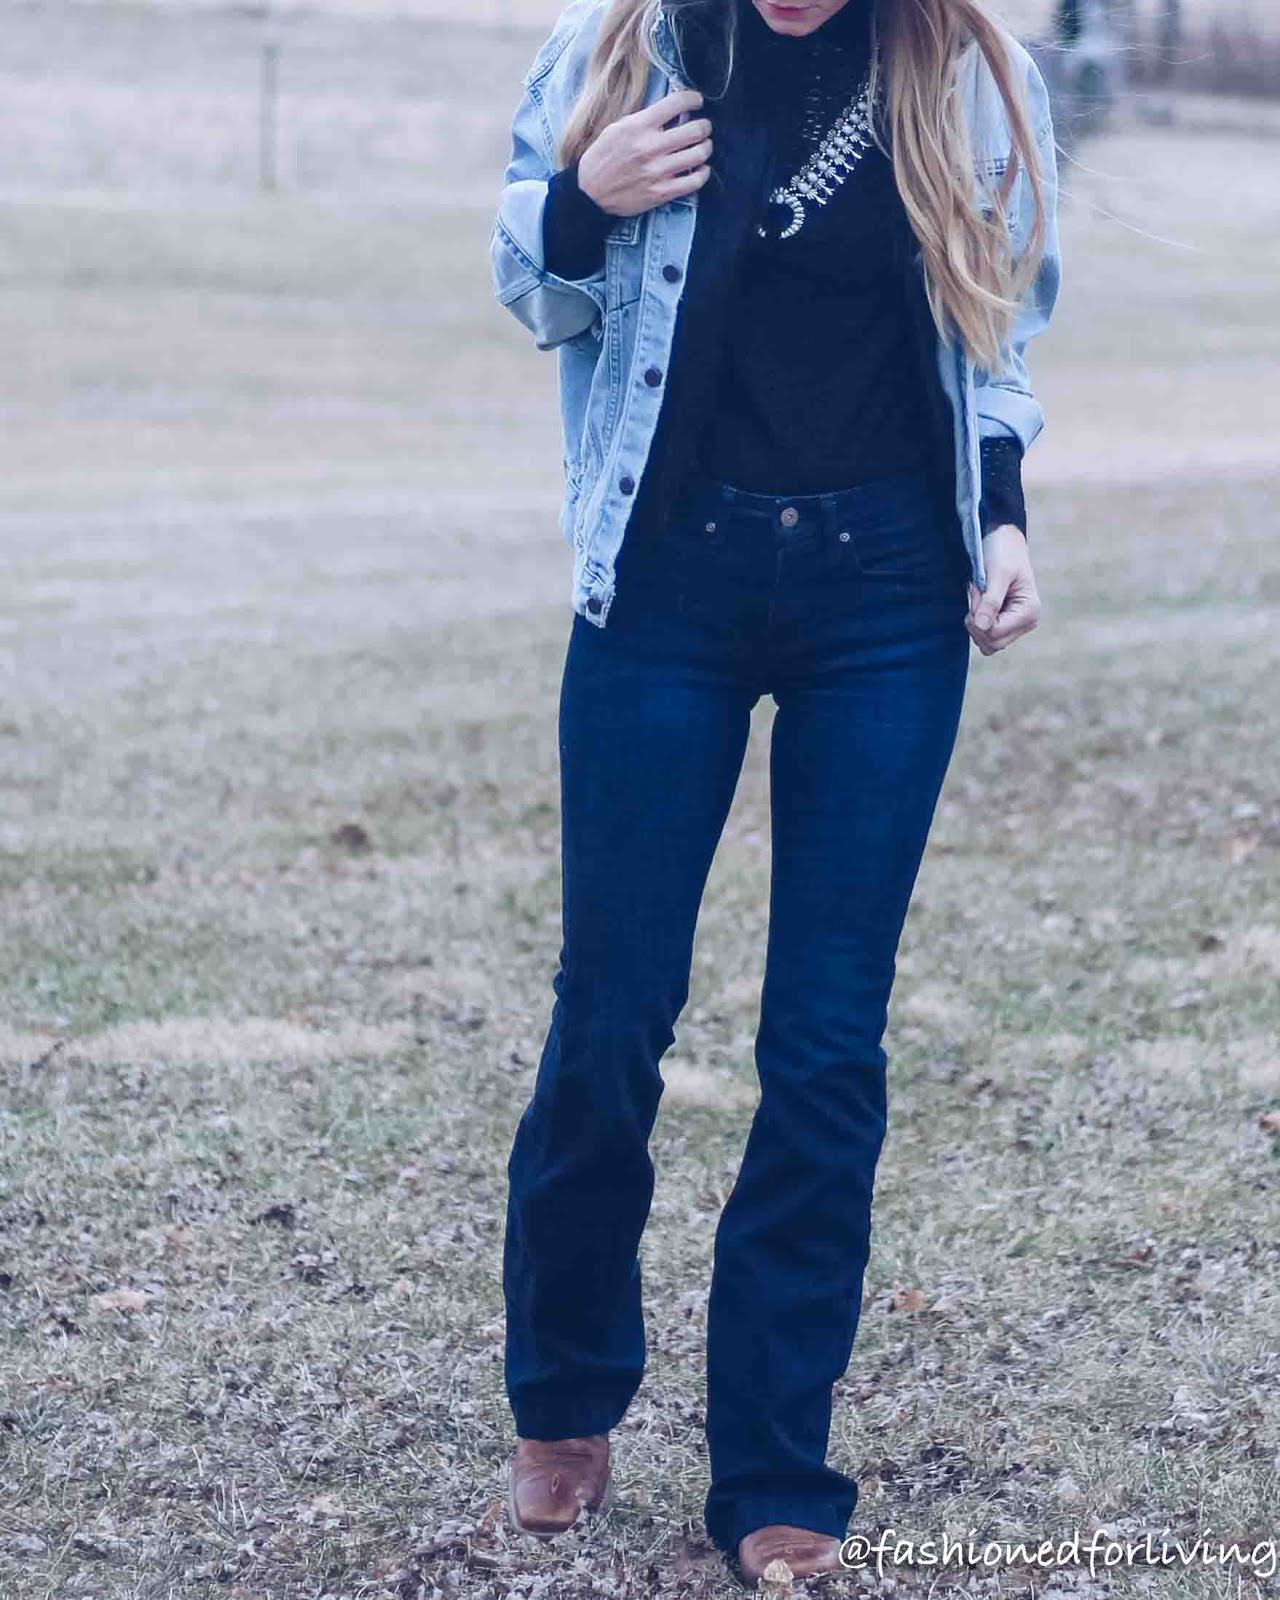 cowgirl boots and jeans outfits